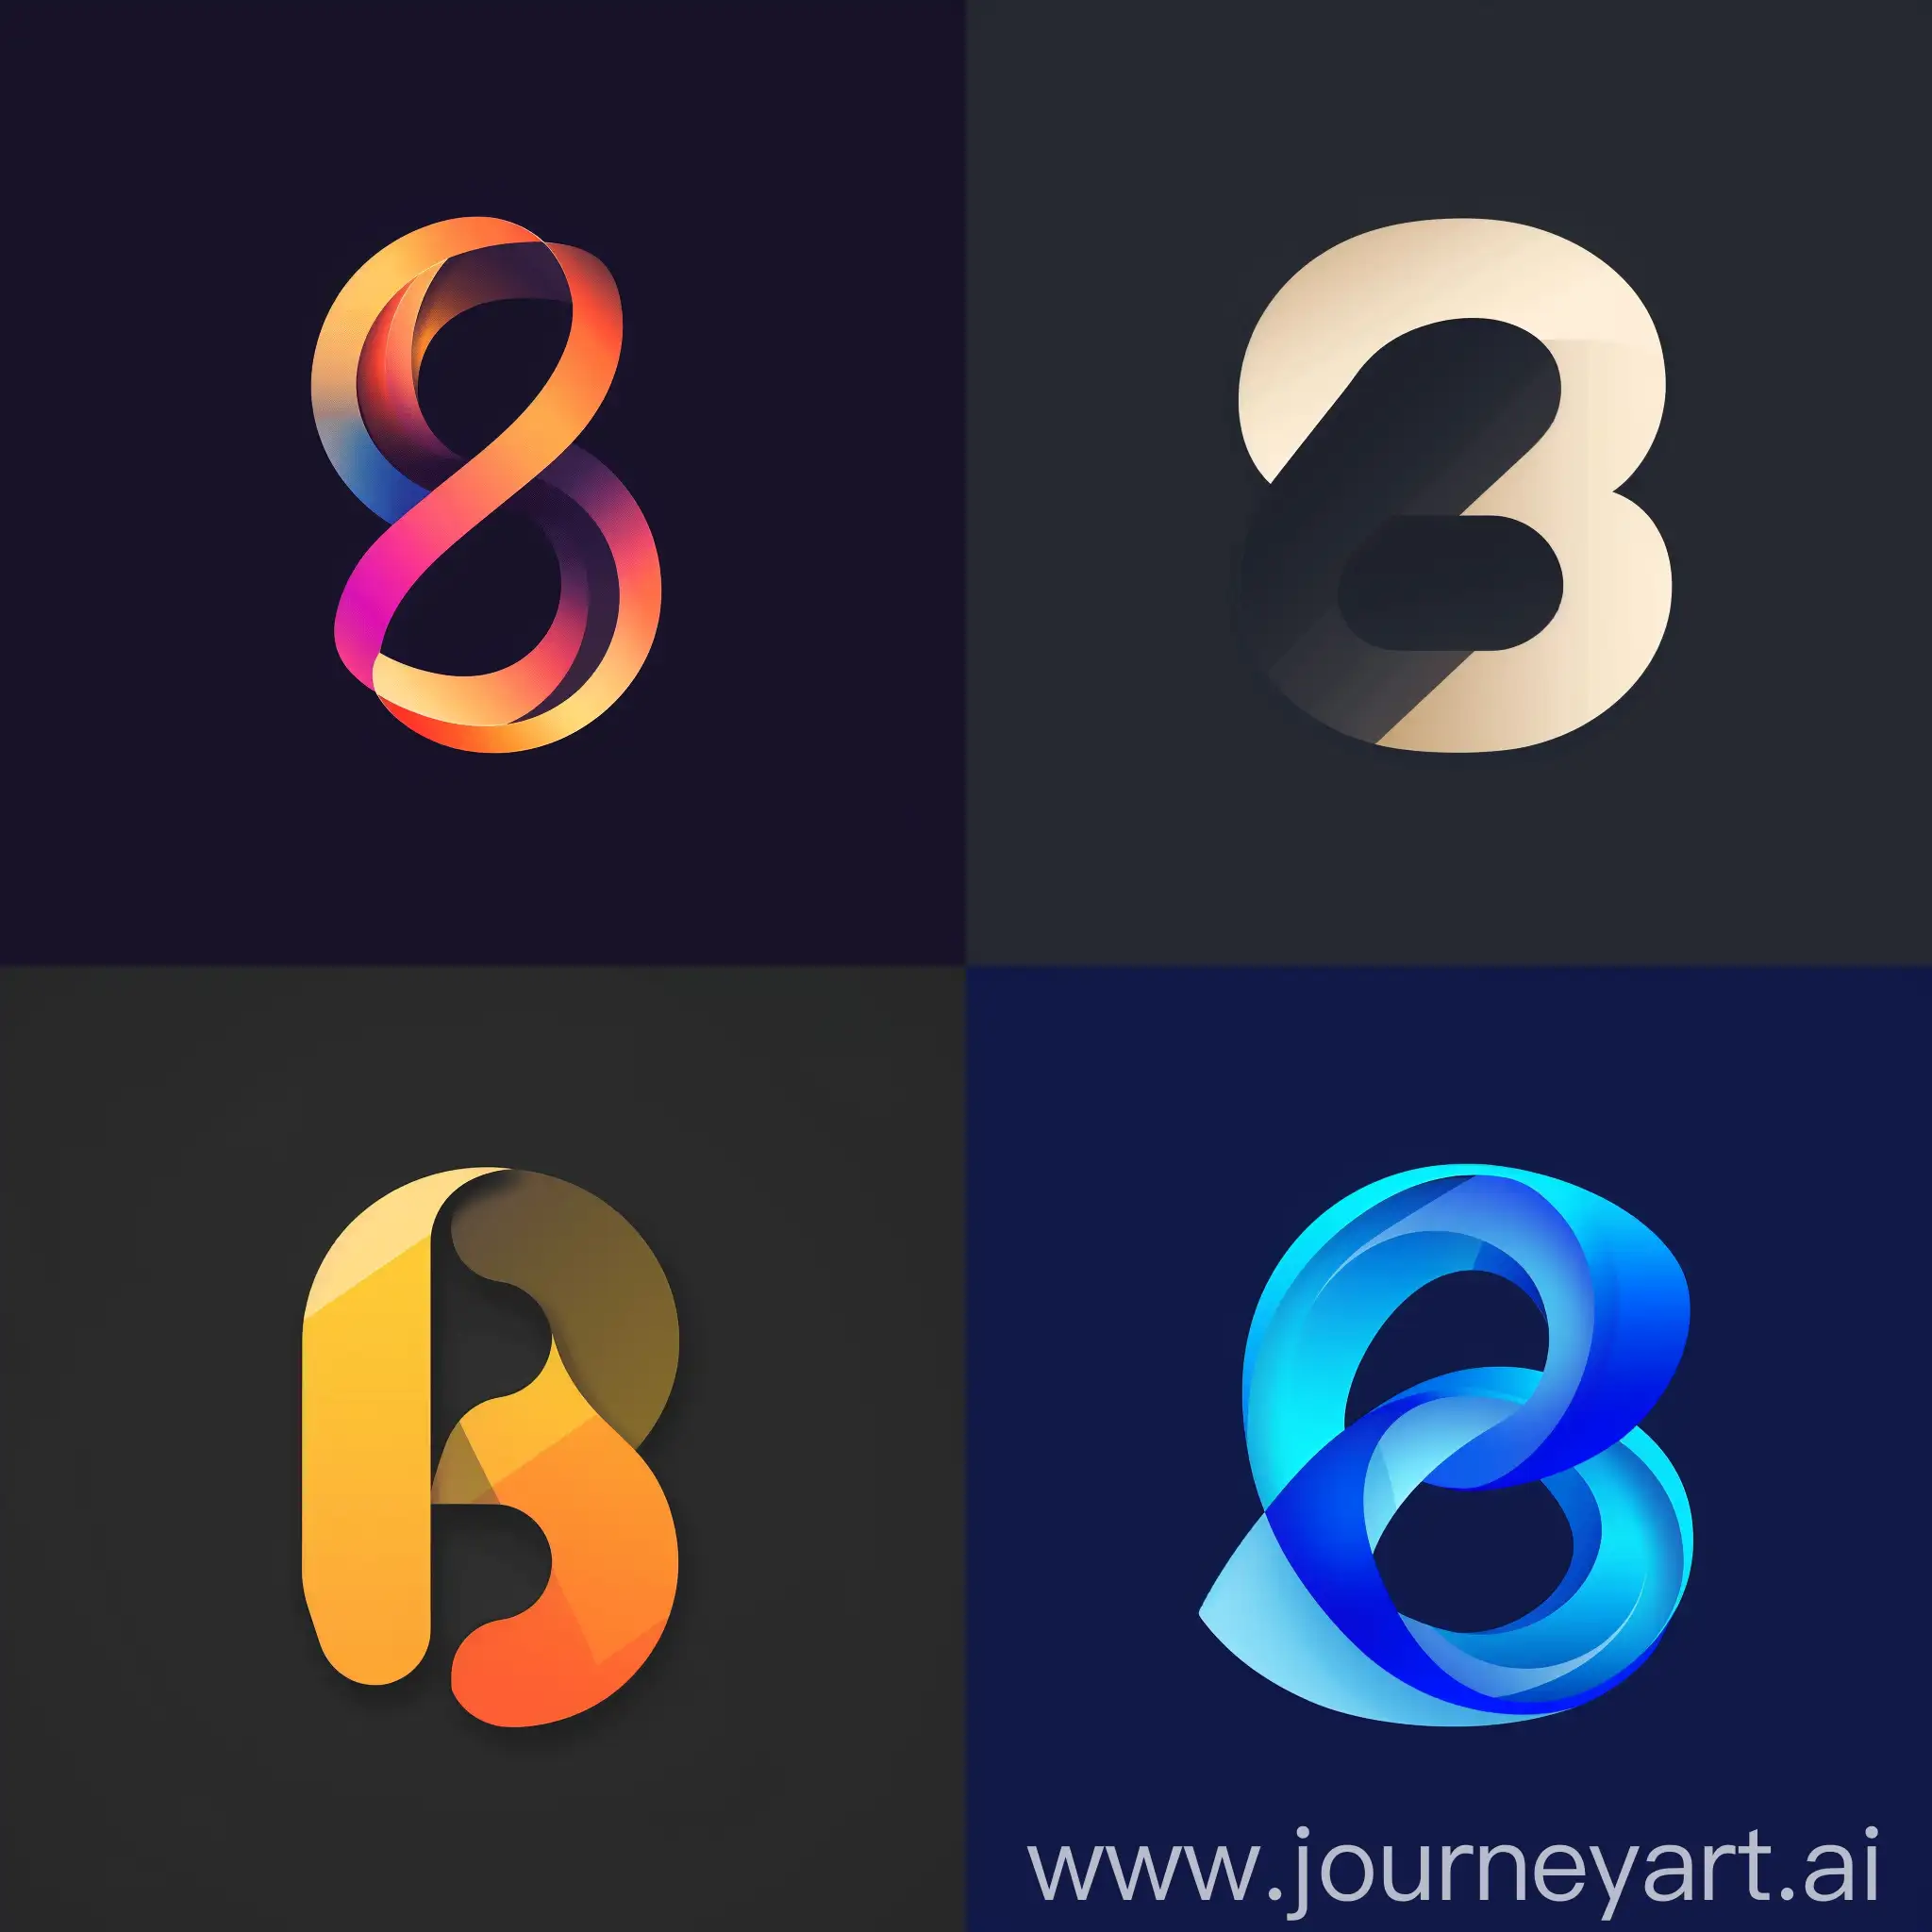 A modern and minimalistic logo related to the letter 'B' for a software development agency. 